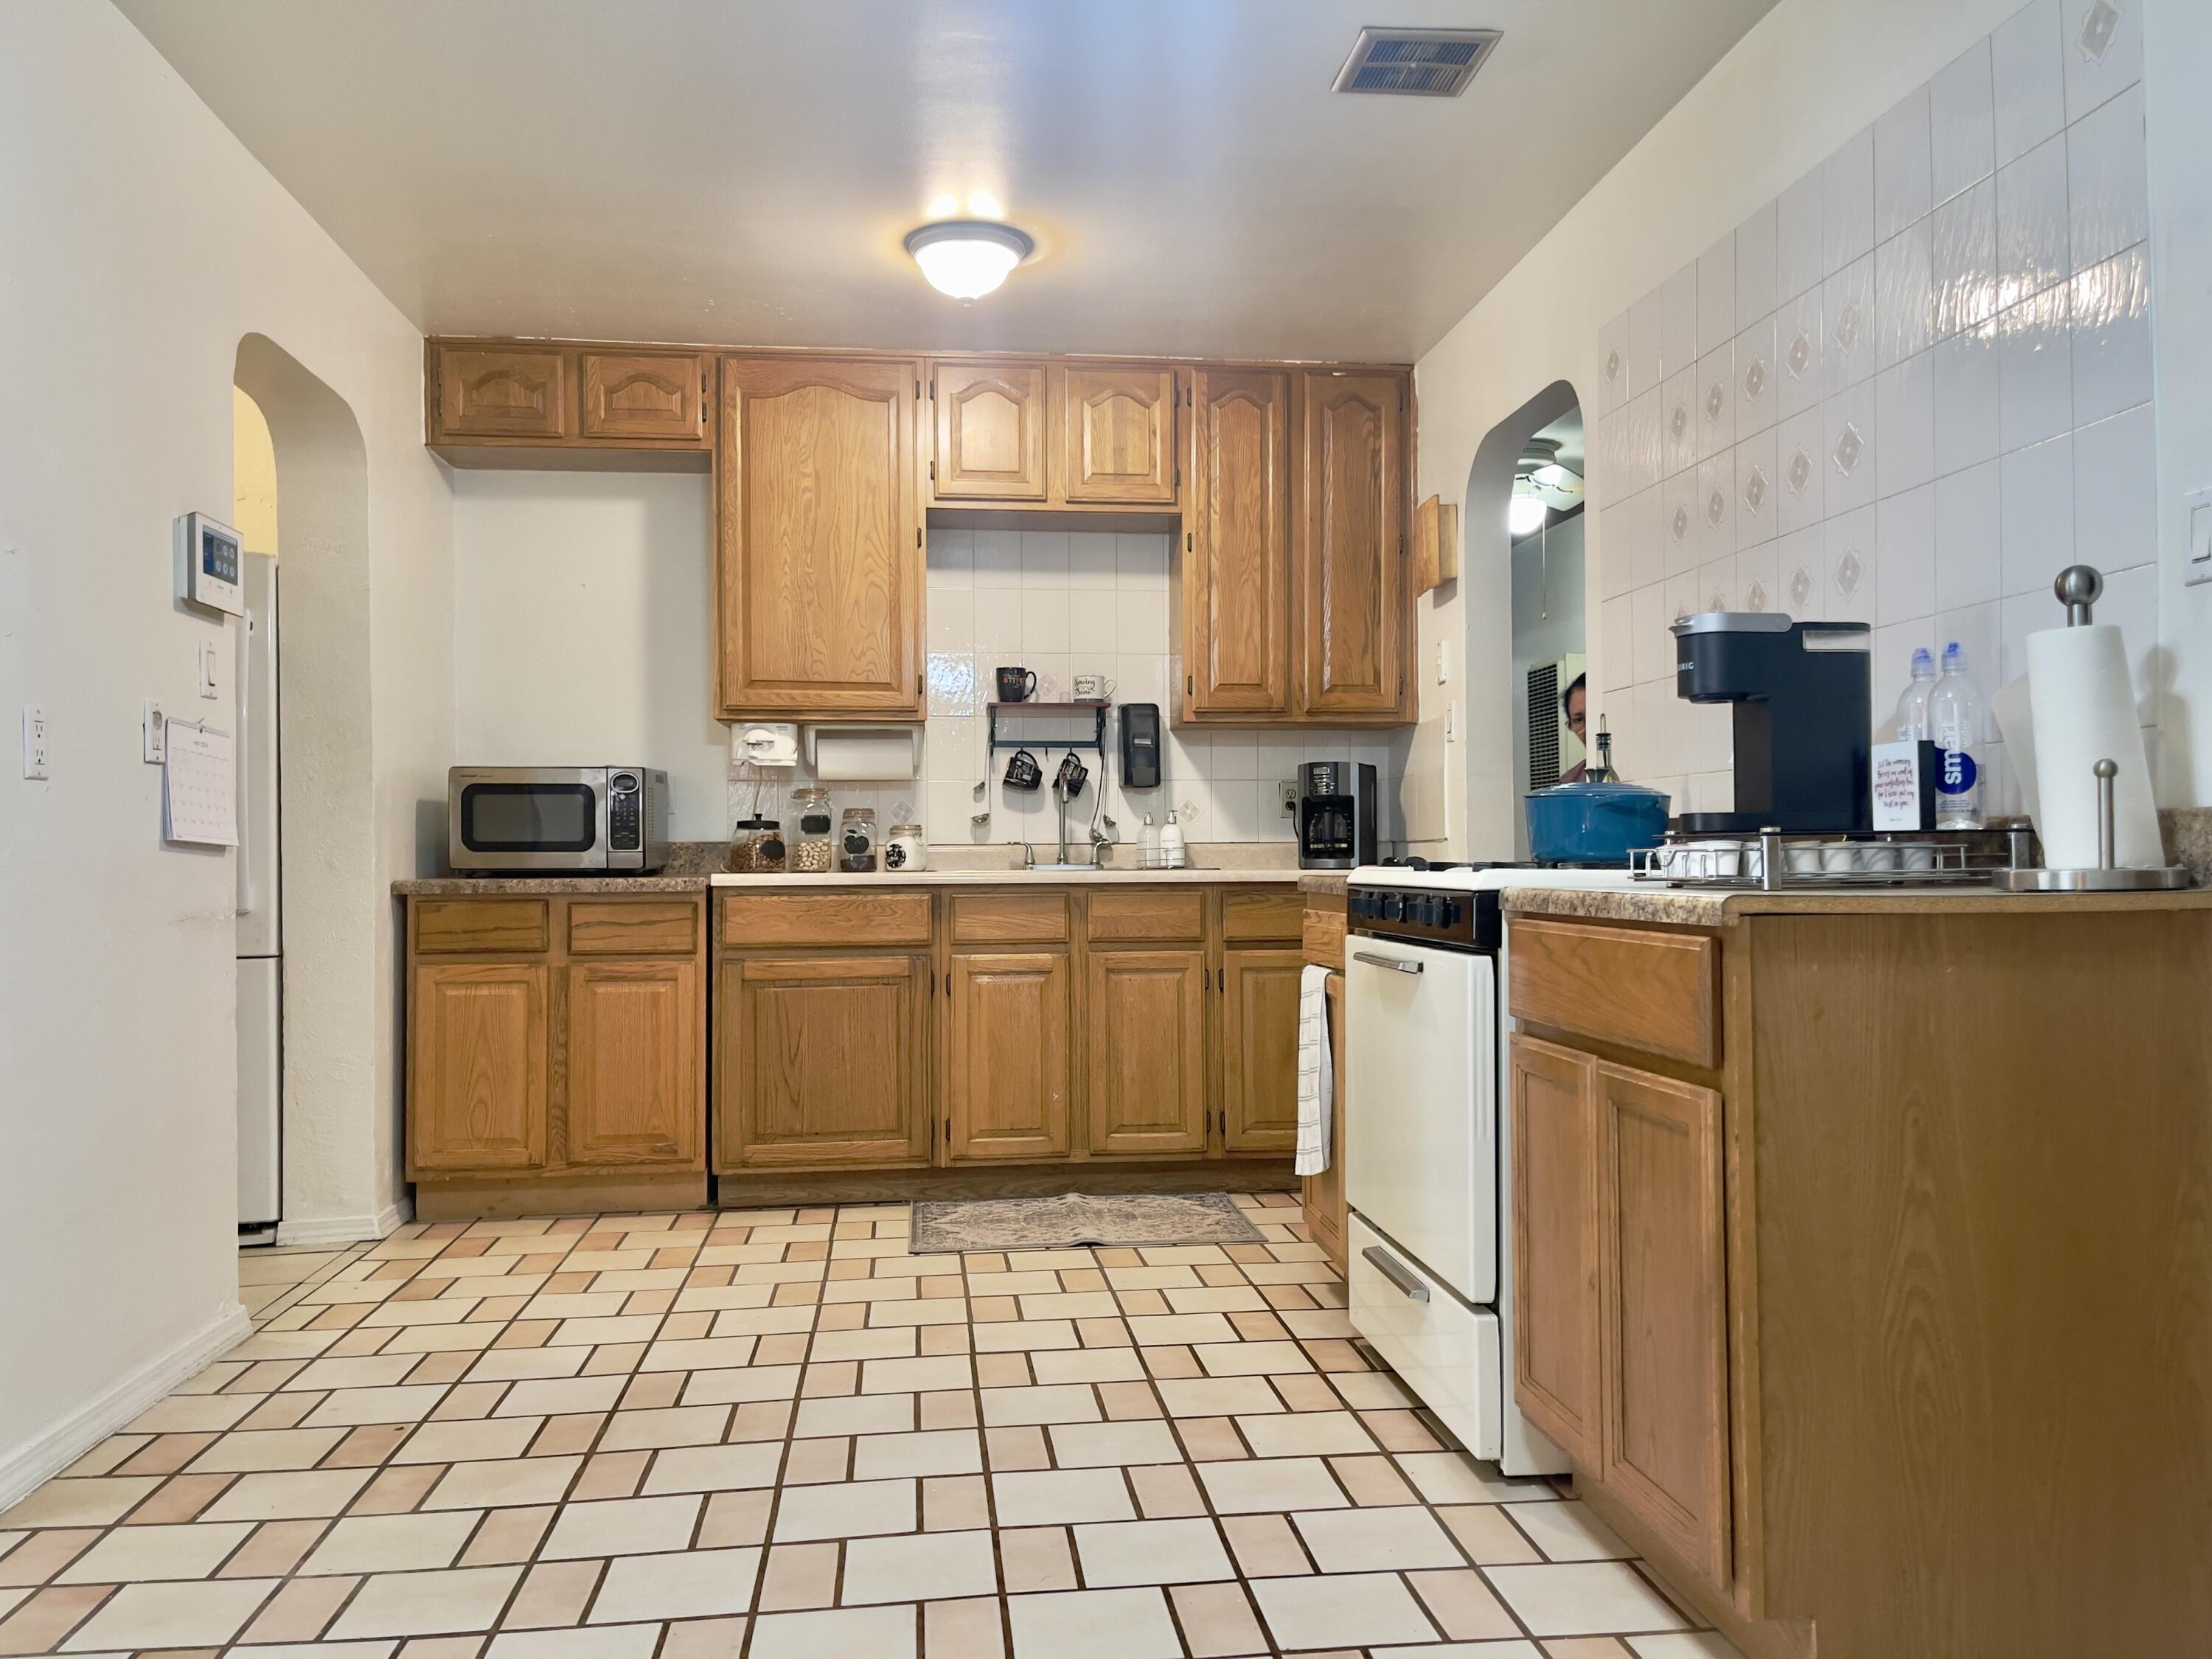 343 62nd Street NW, Albuquerque, New Mexico 87105, 3 Bedrooms Bedrooms, ,2 BathroomsBathrooms,Residential,For Sale,343 62nd Street NW,1062068